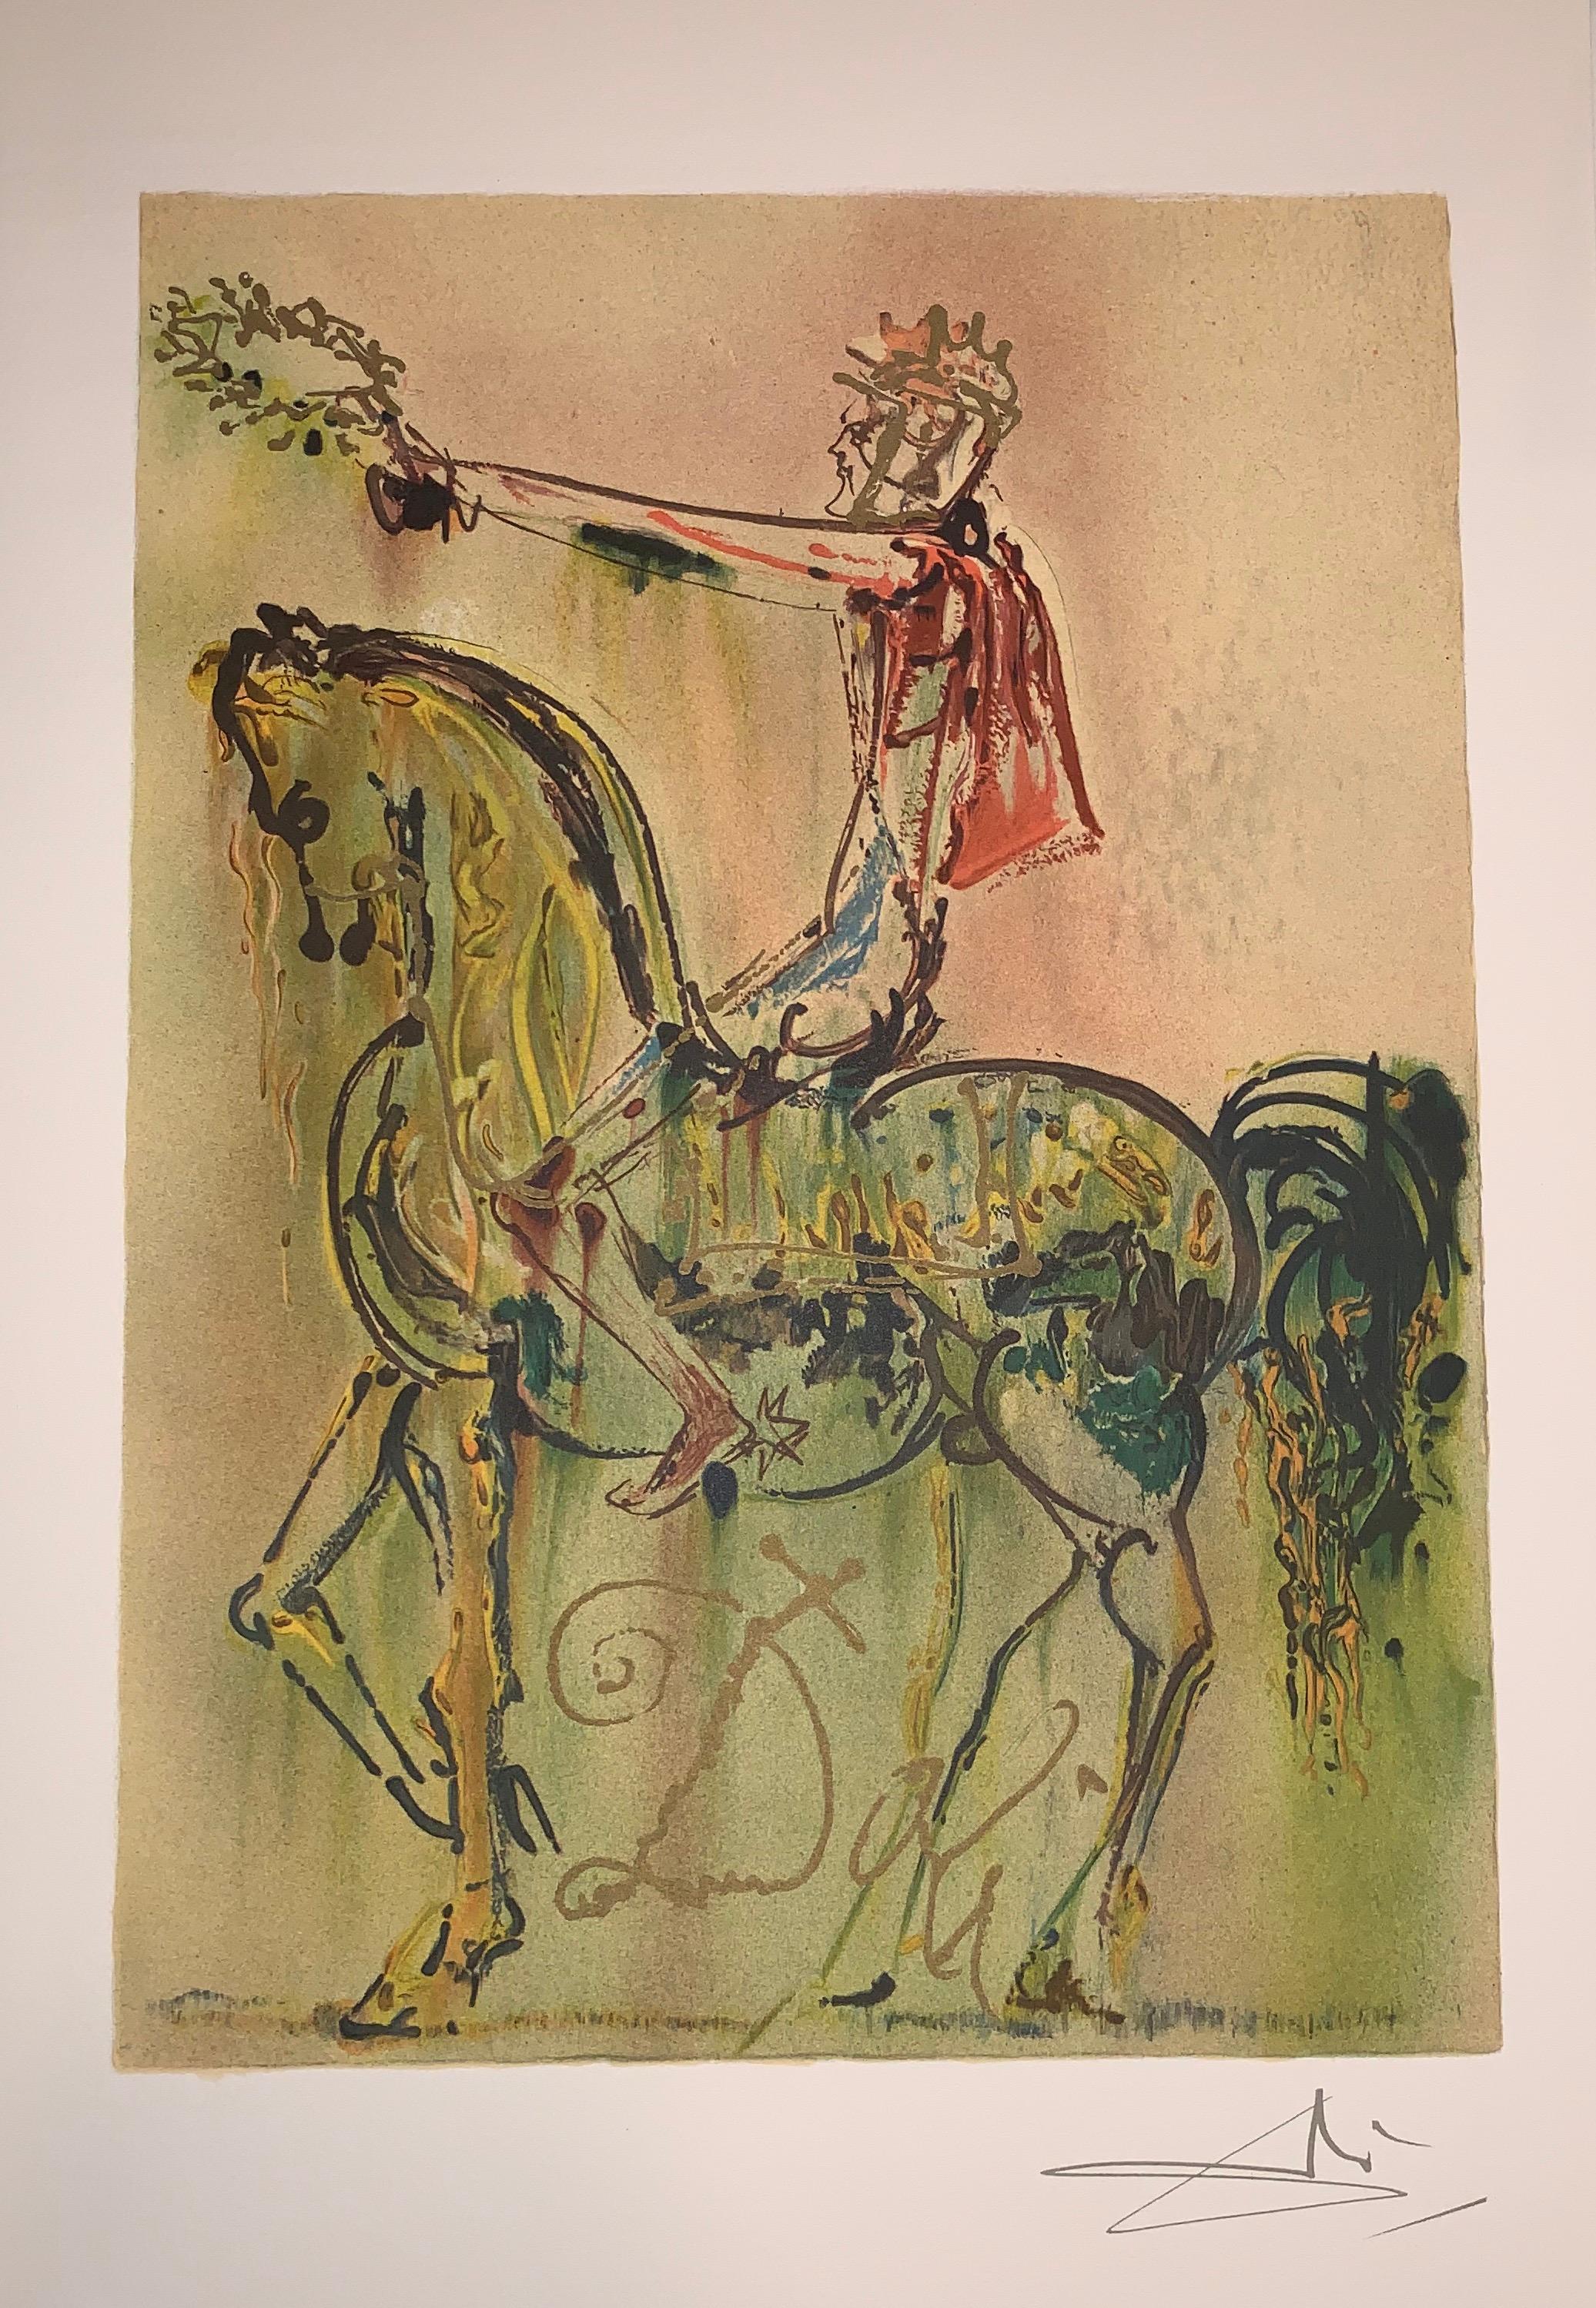 The Roman Cavalier The horses of Dali - Lithograph - Surrealist - 1983 - Print by (after) Salvador Dali